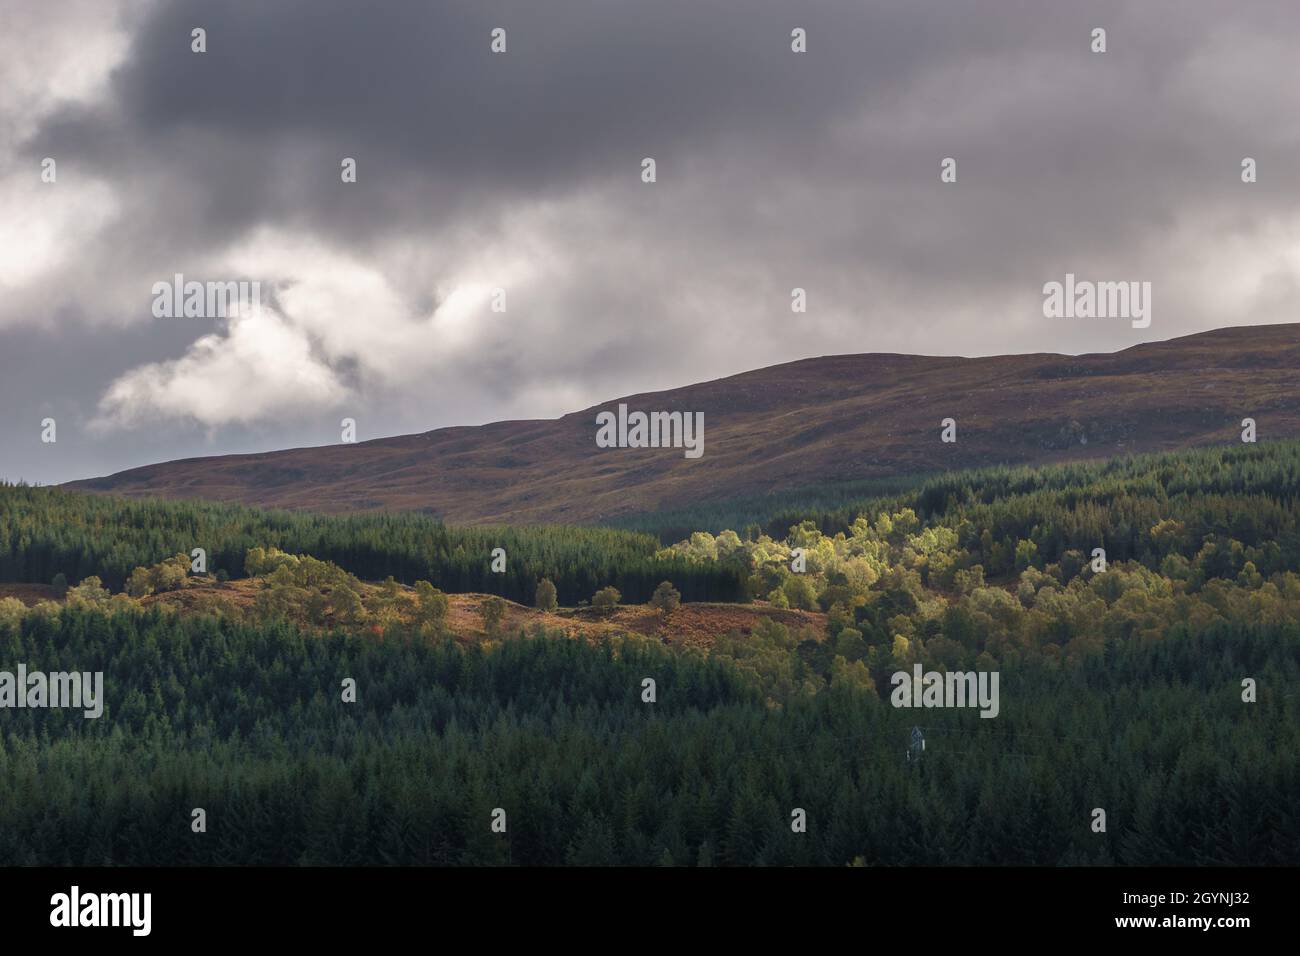 Detail of scottish landscape with forest on hill side in autumn under a cloudy sky, Scotland Stock Photo